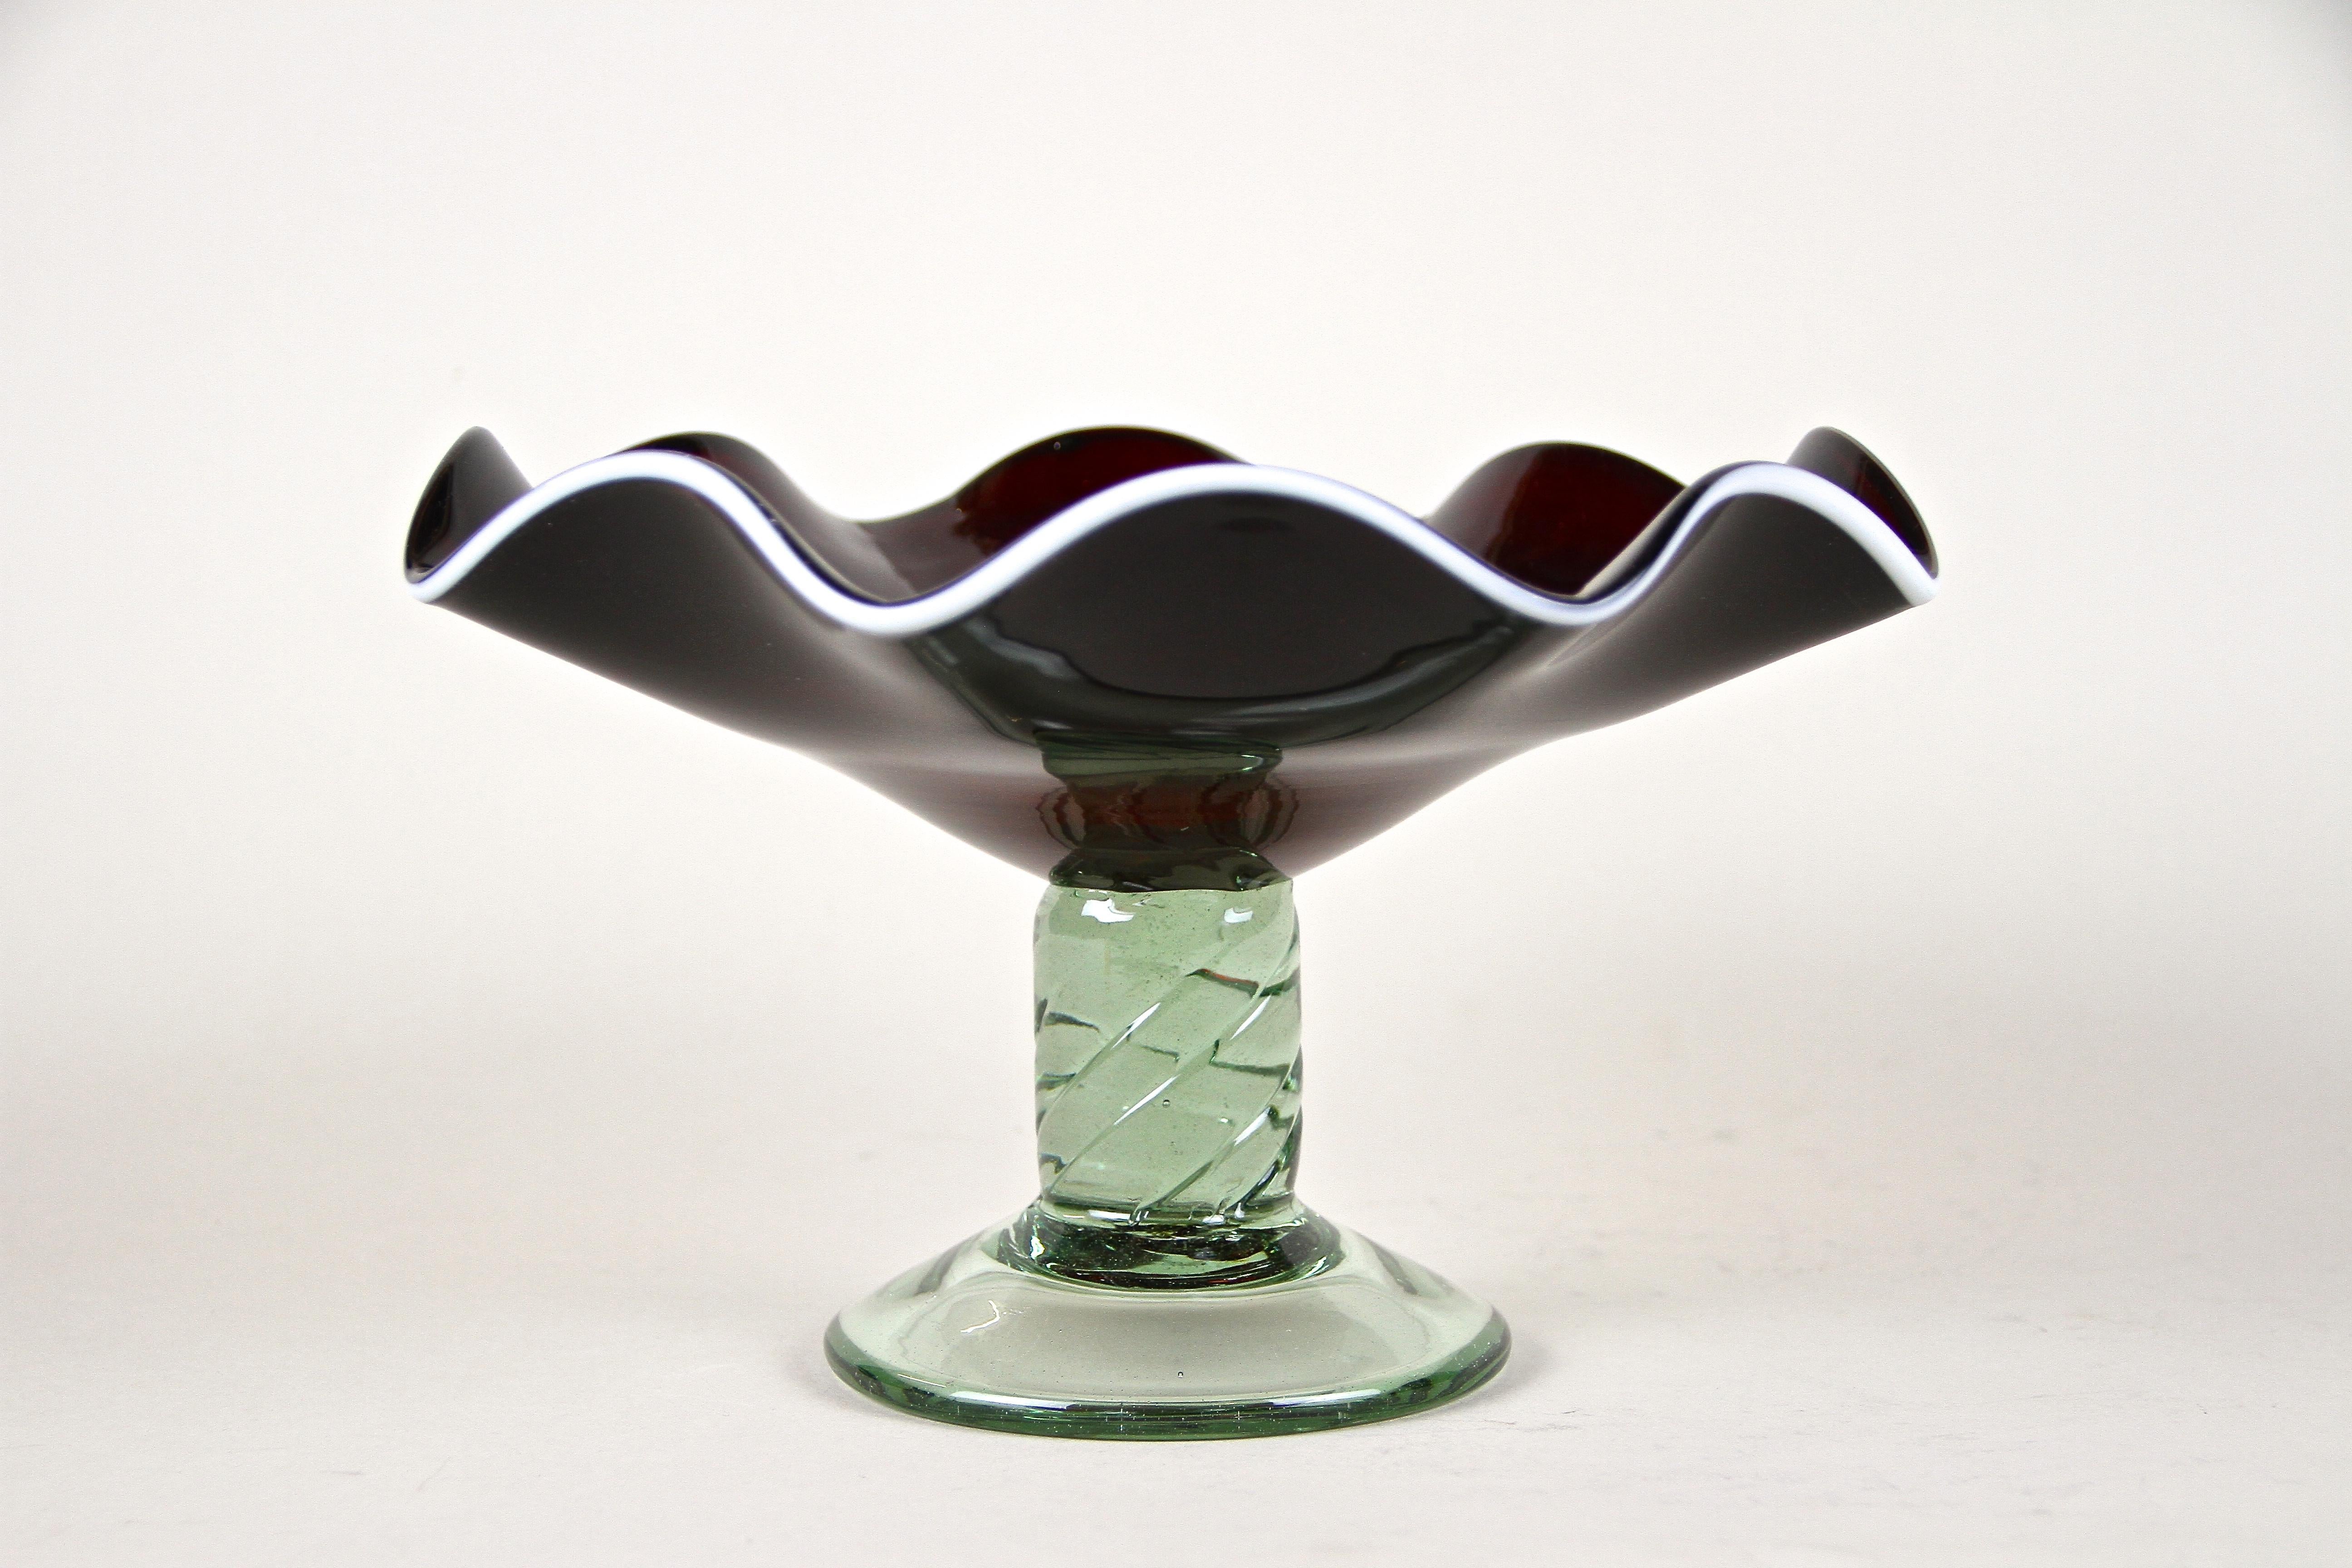 Stunning Murano glass centerpiece/ bowl out of Italy from the late 20th century around 1970. An unusual piece of Murano glass art with great shaped, super dark red almost black looking wavy glass bowl. Embellished by an additional delicate white